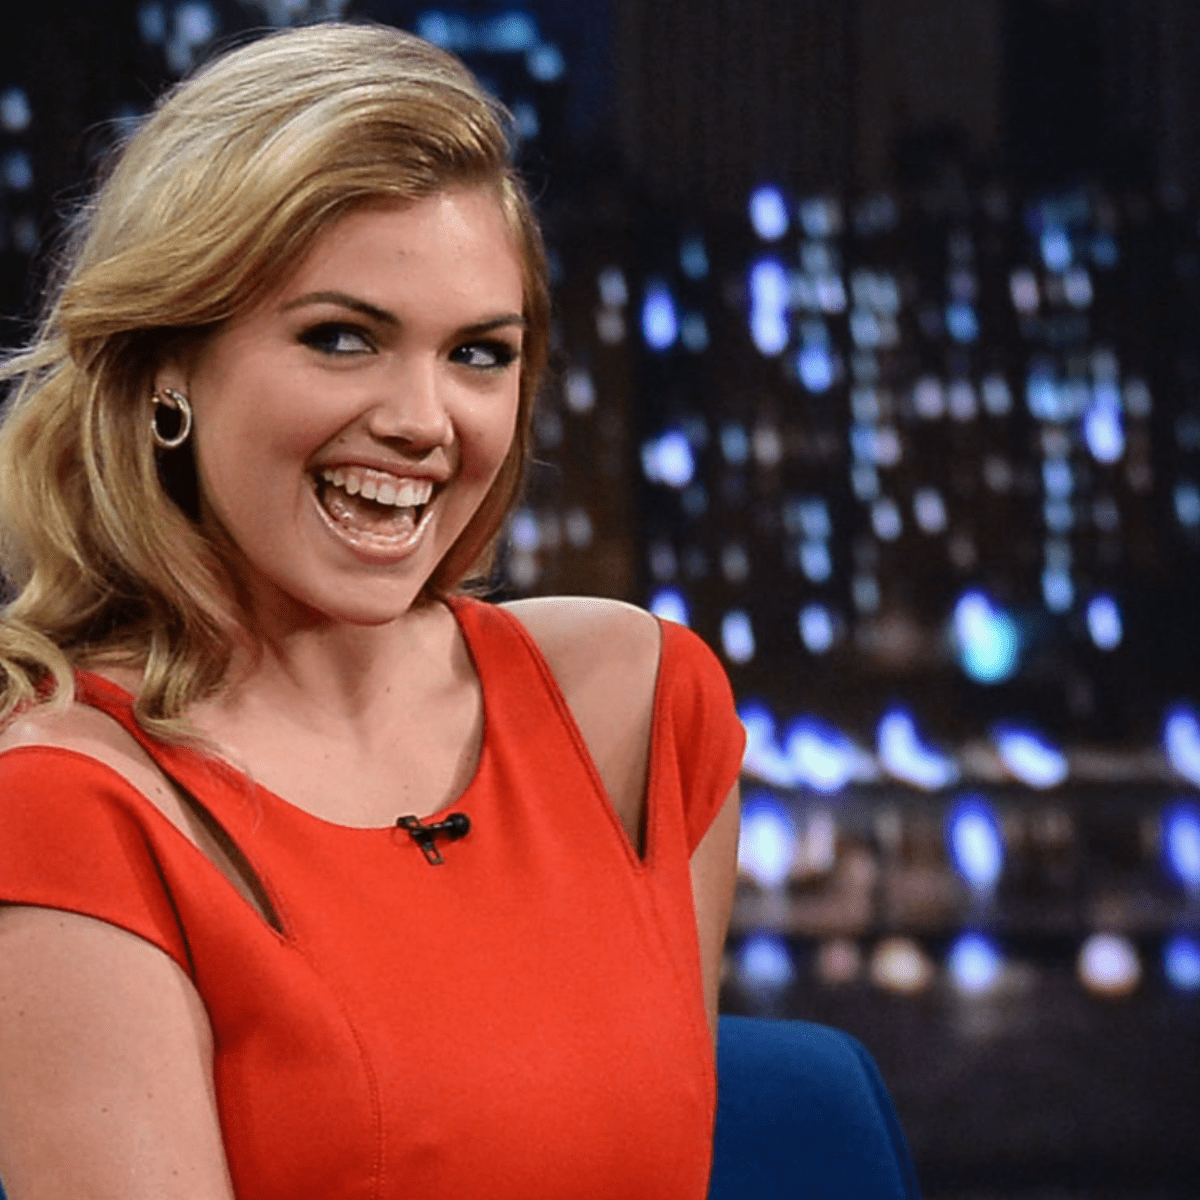 Sports World Reacts To Kate Upton's Viral Outfit - The Spun